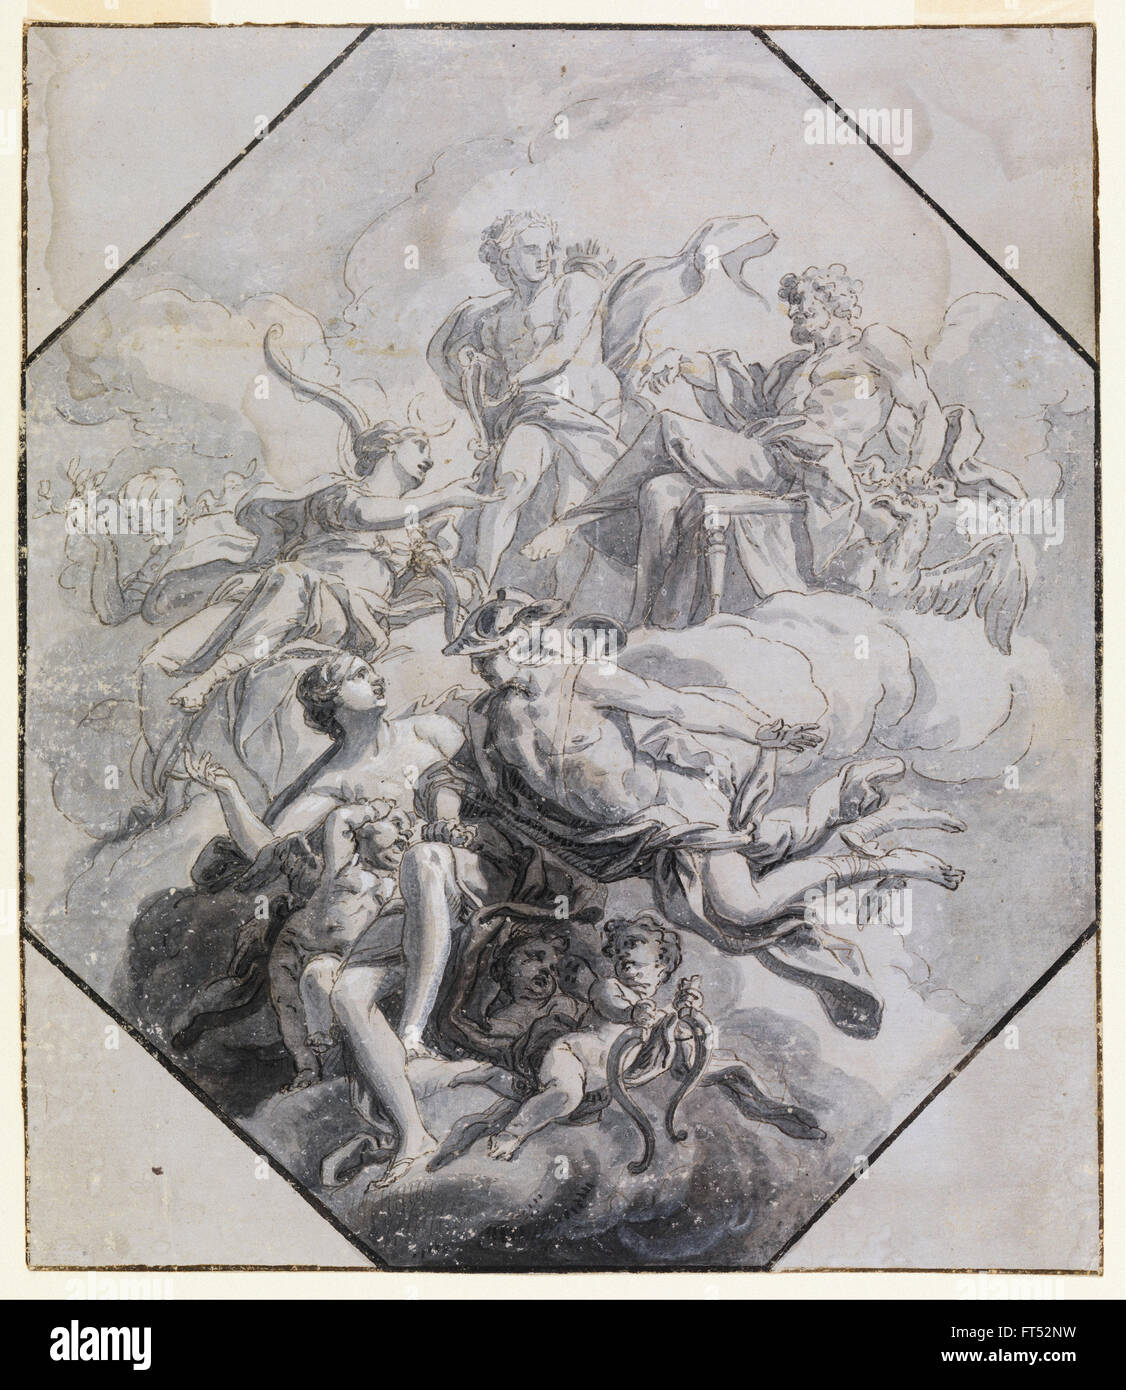 Antonio Manno - Design for a Ceiling Painting on Theme of Olympus - Cooper-Hewitt, National Design Museum Stock Photo